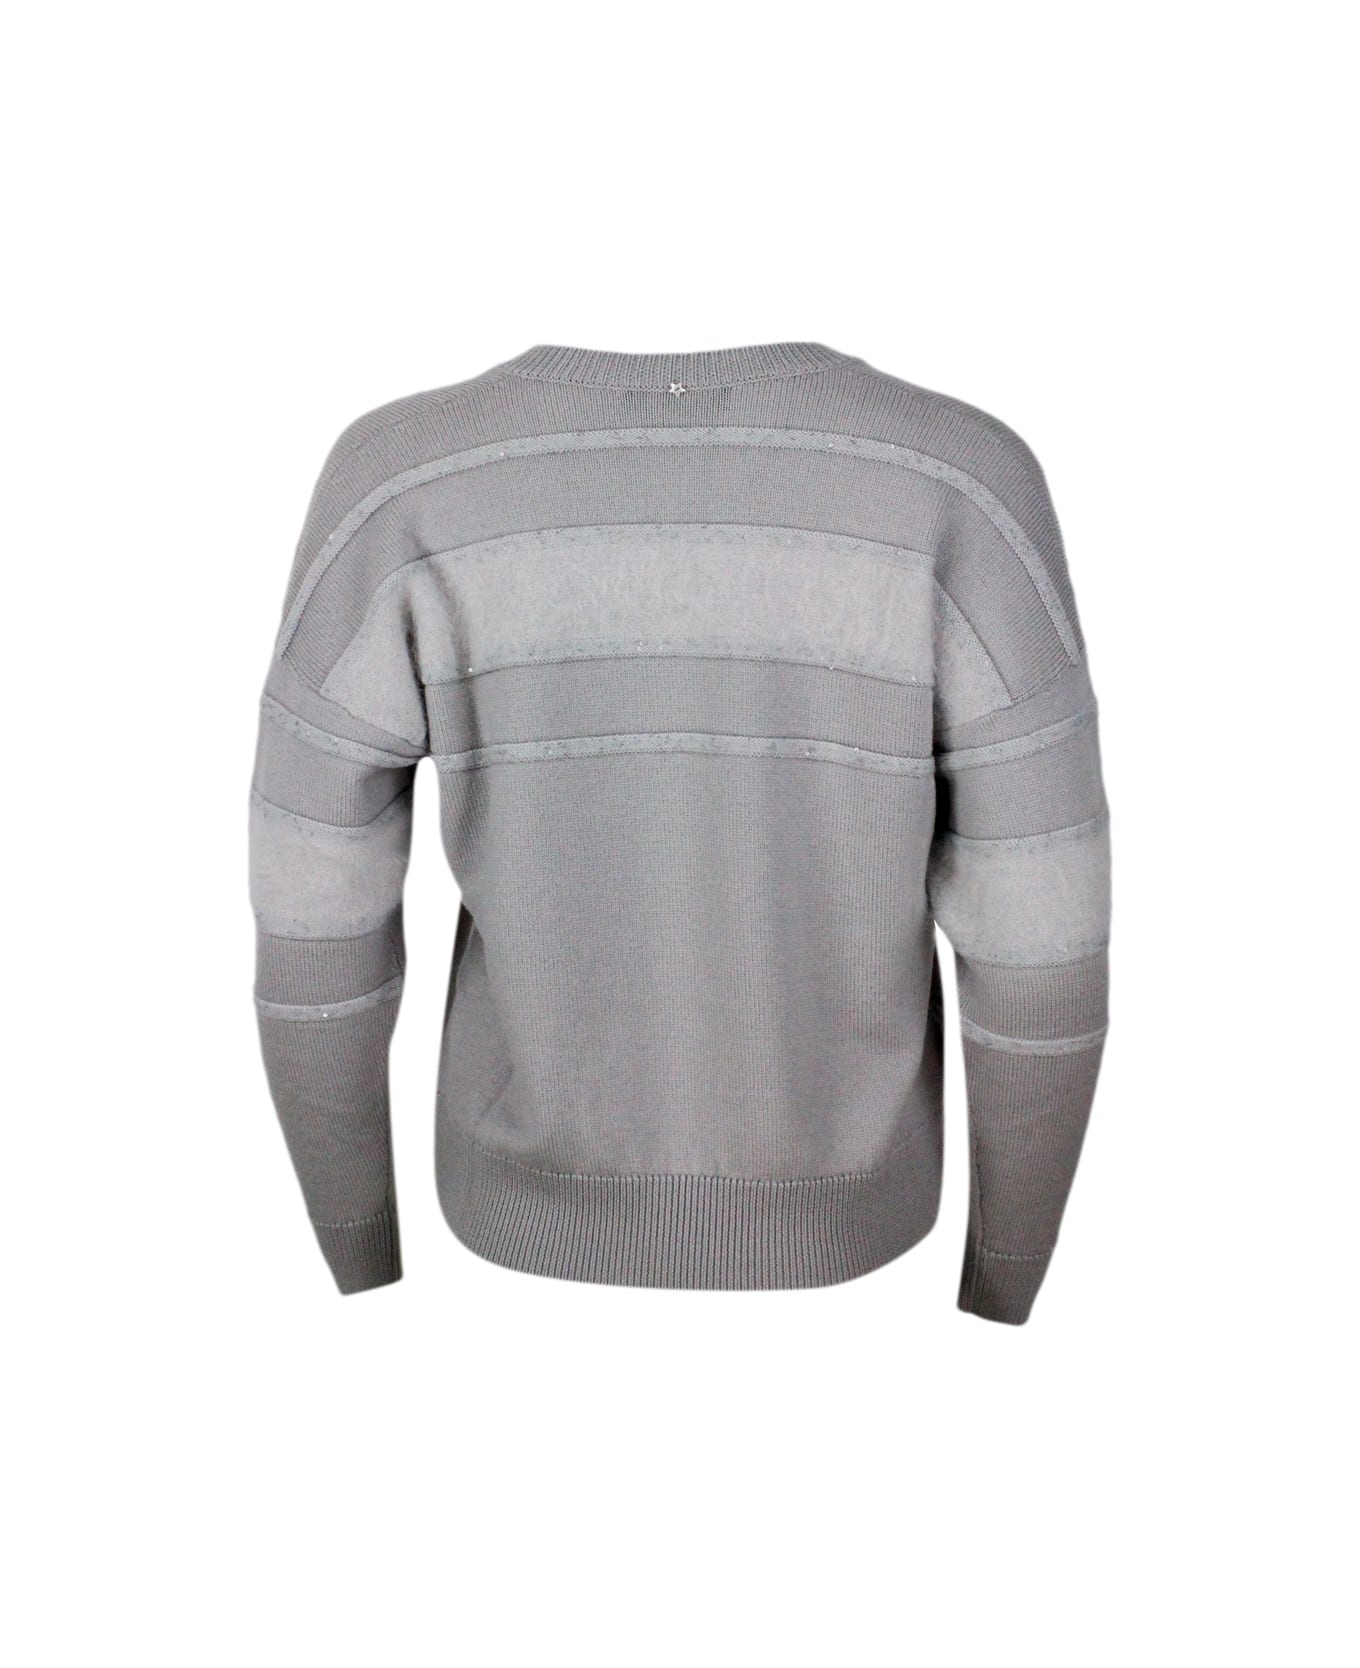 Lorena Antoniazzi V-neck Sweater Made Of Soft Wool With Three-dimensional Workmanship Embellished With Micro Sequins - Grey Mink